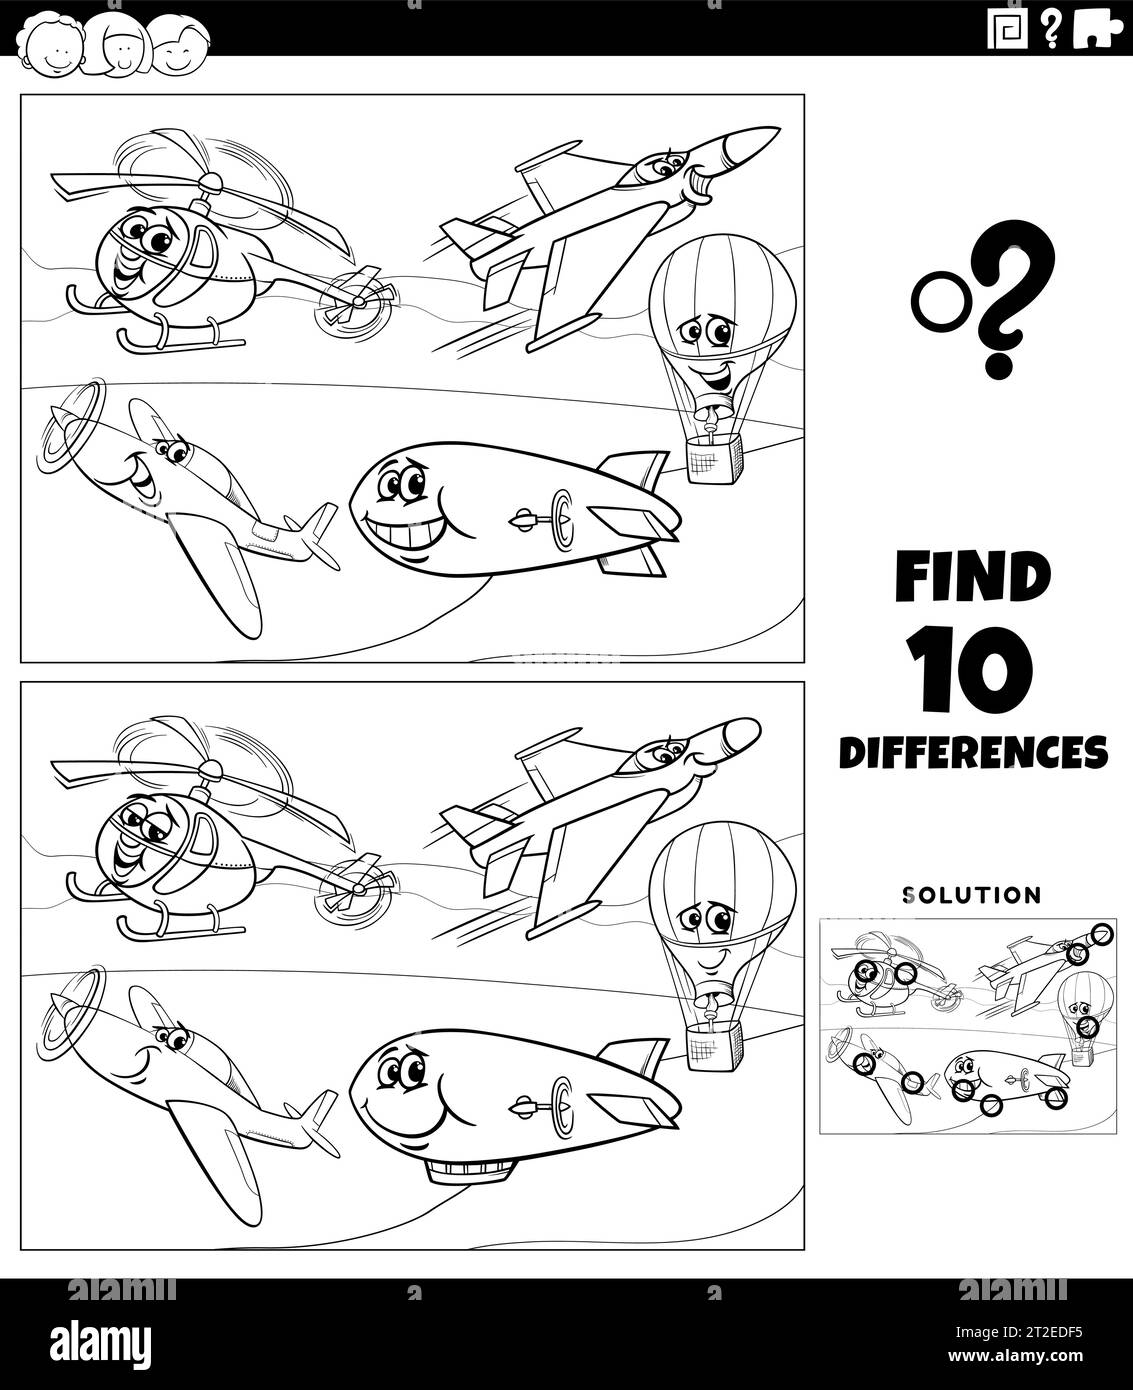 Black and white cartoon illustration of finding the differences between pictures educational activity with flying vehicles characters coloring page Stock Vector